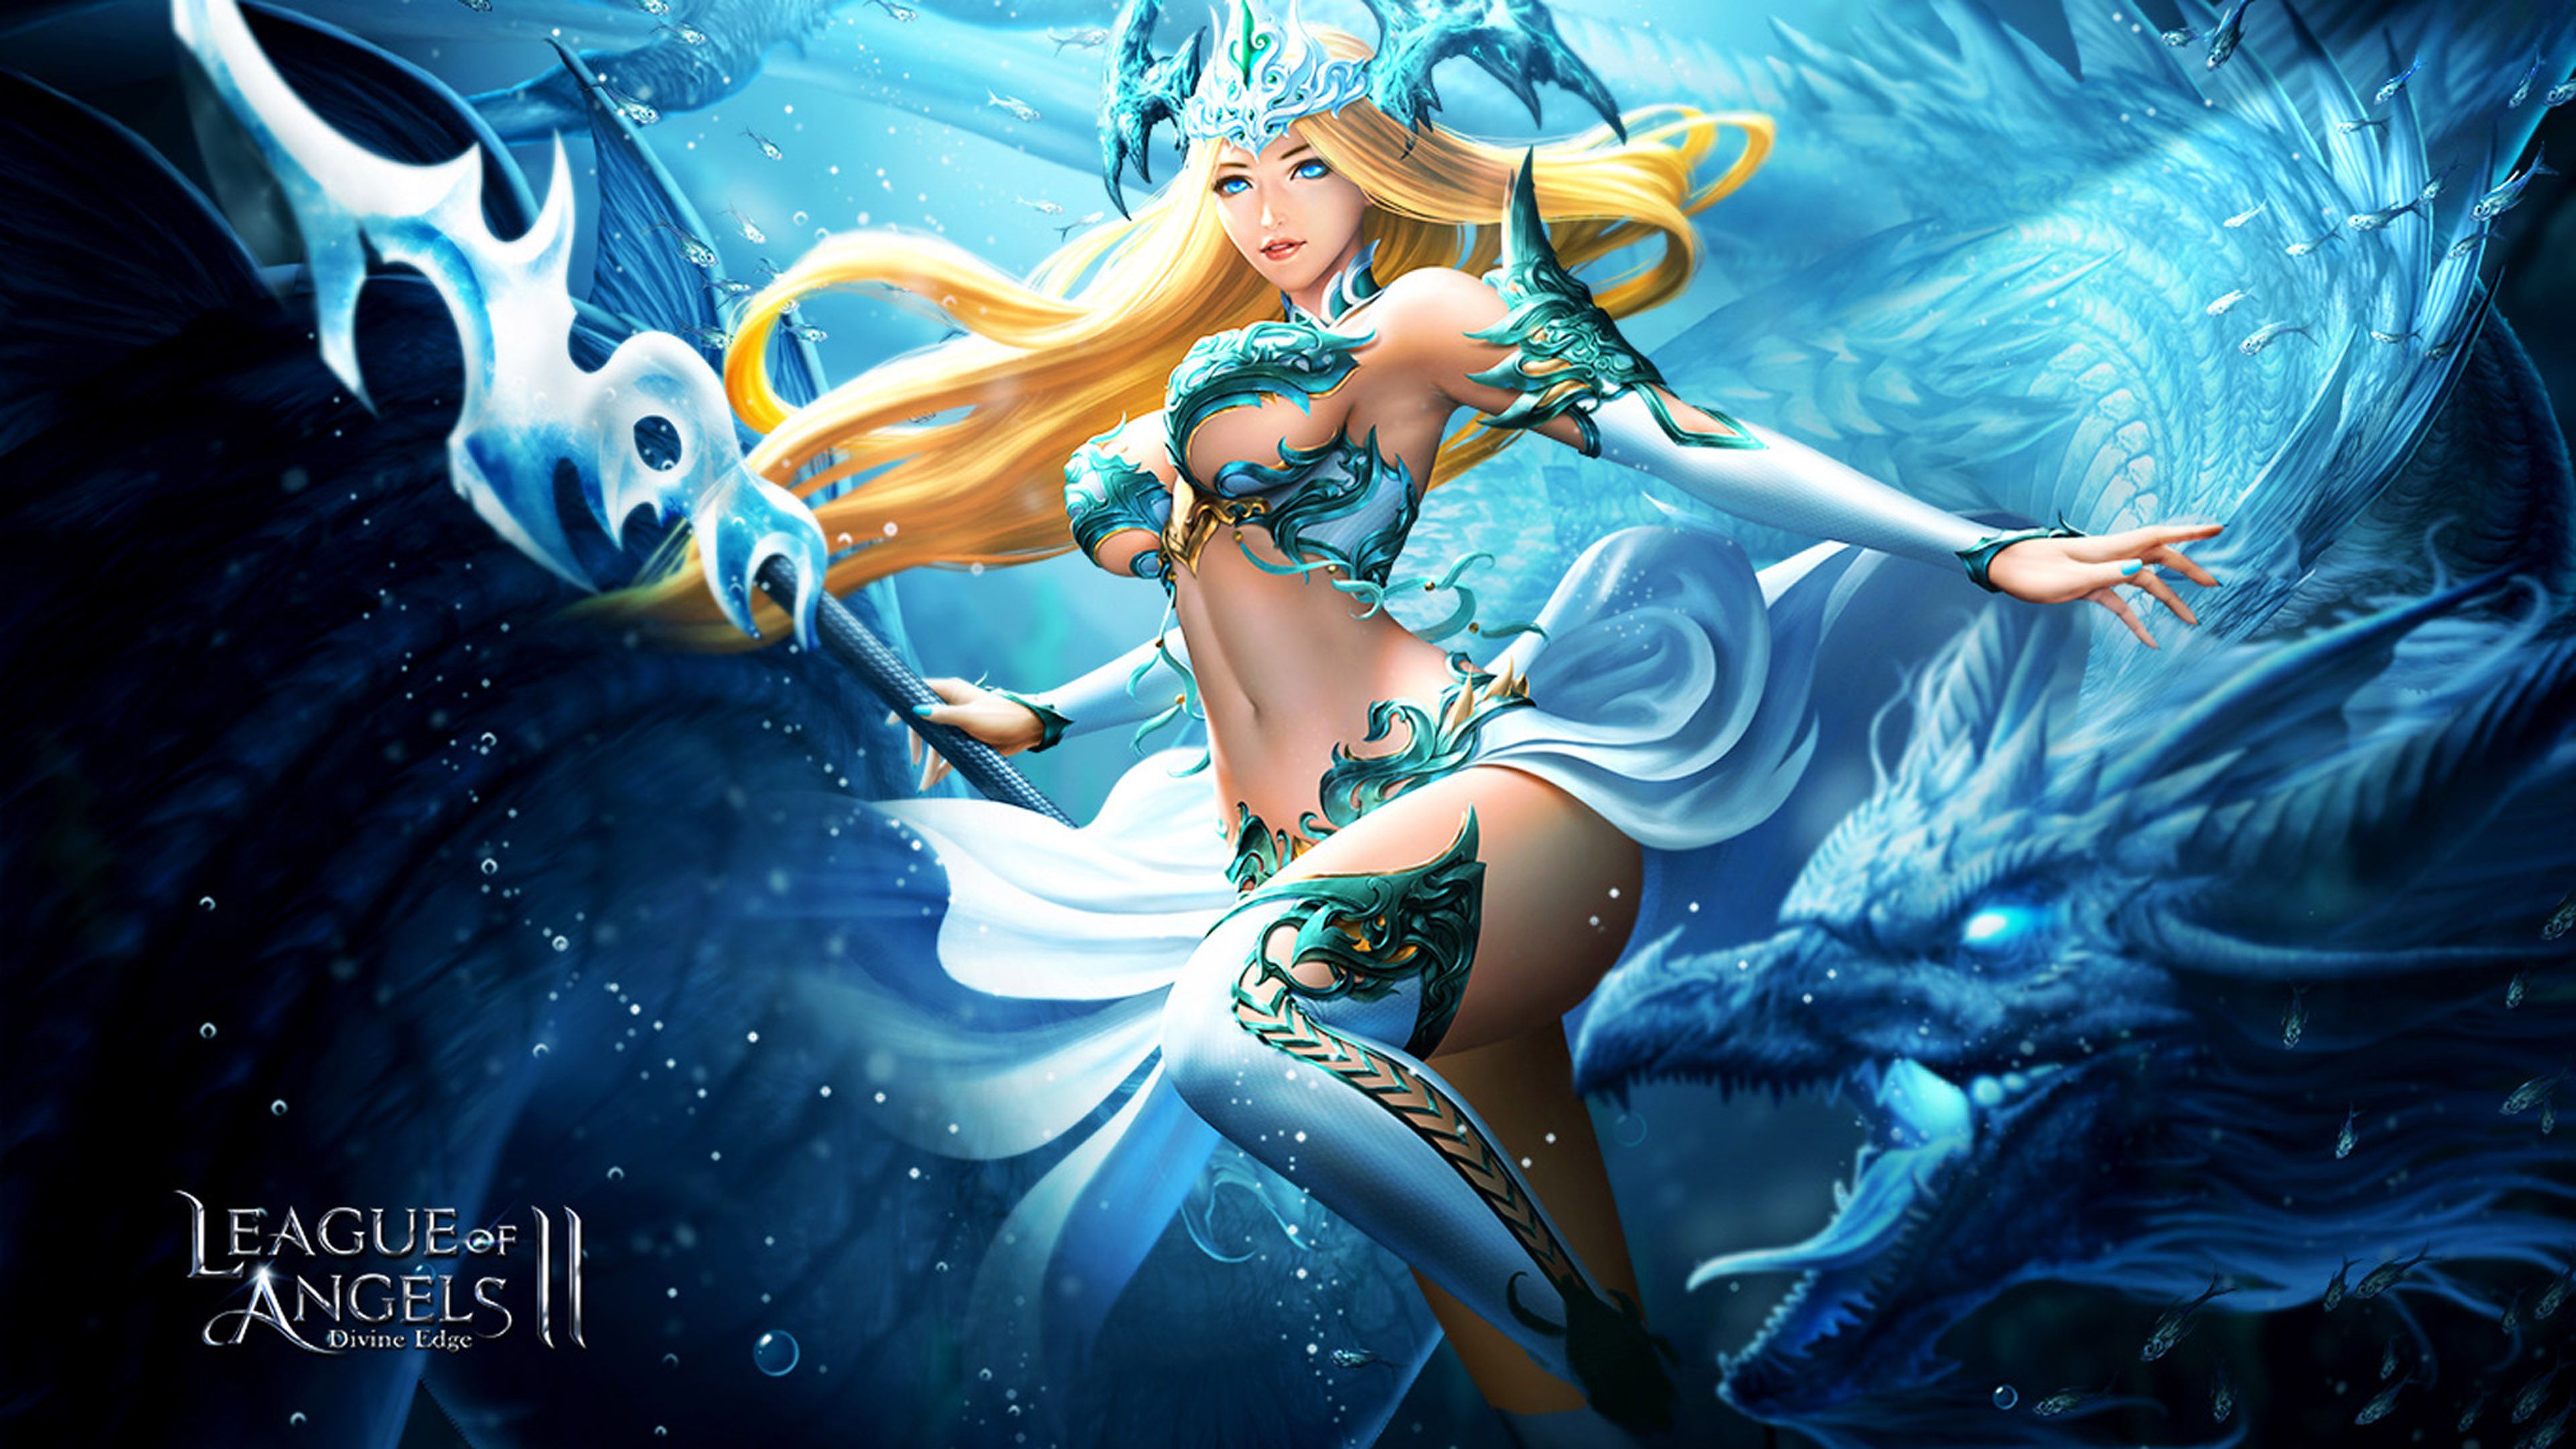 League Of Angels 2 characters from video game Lydia Beautiful girl